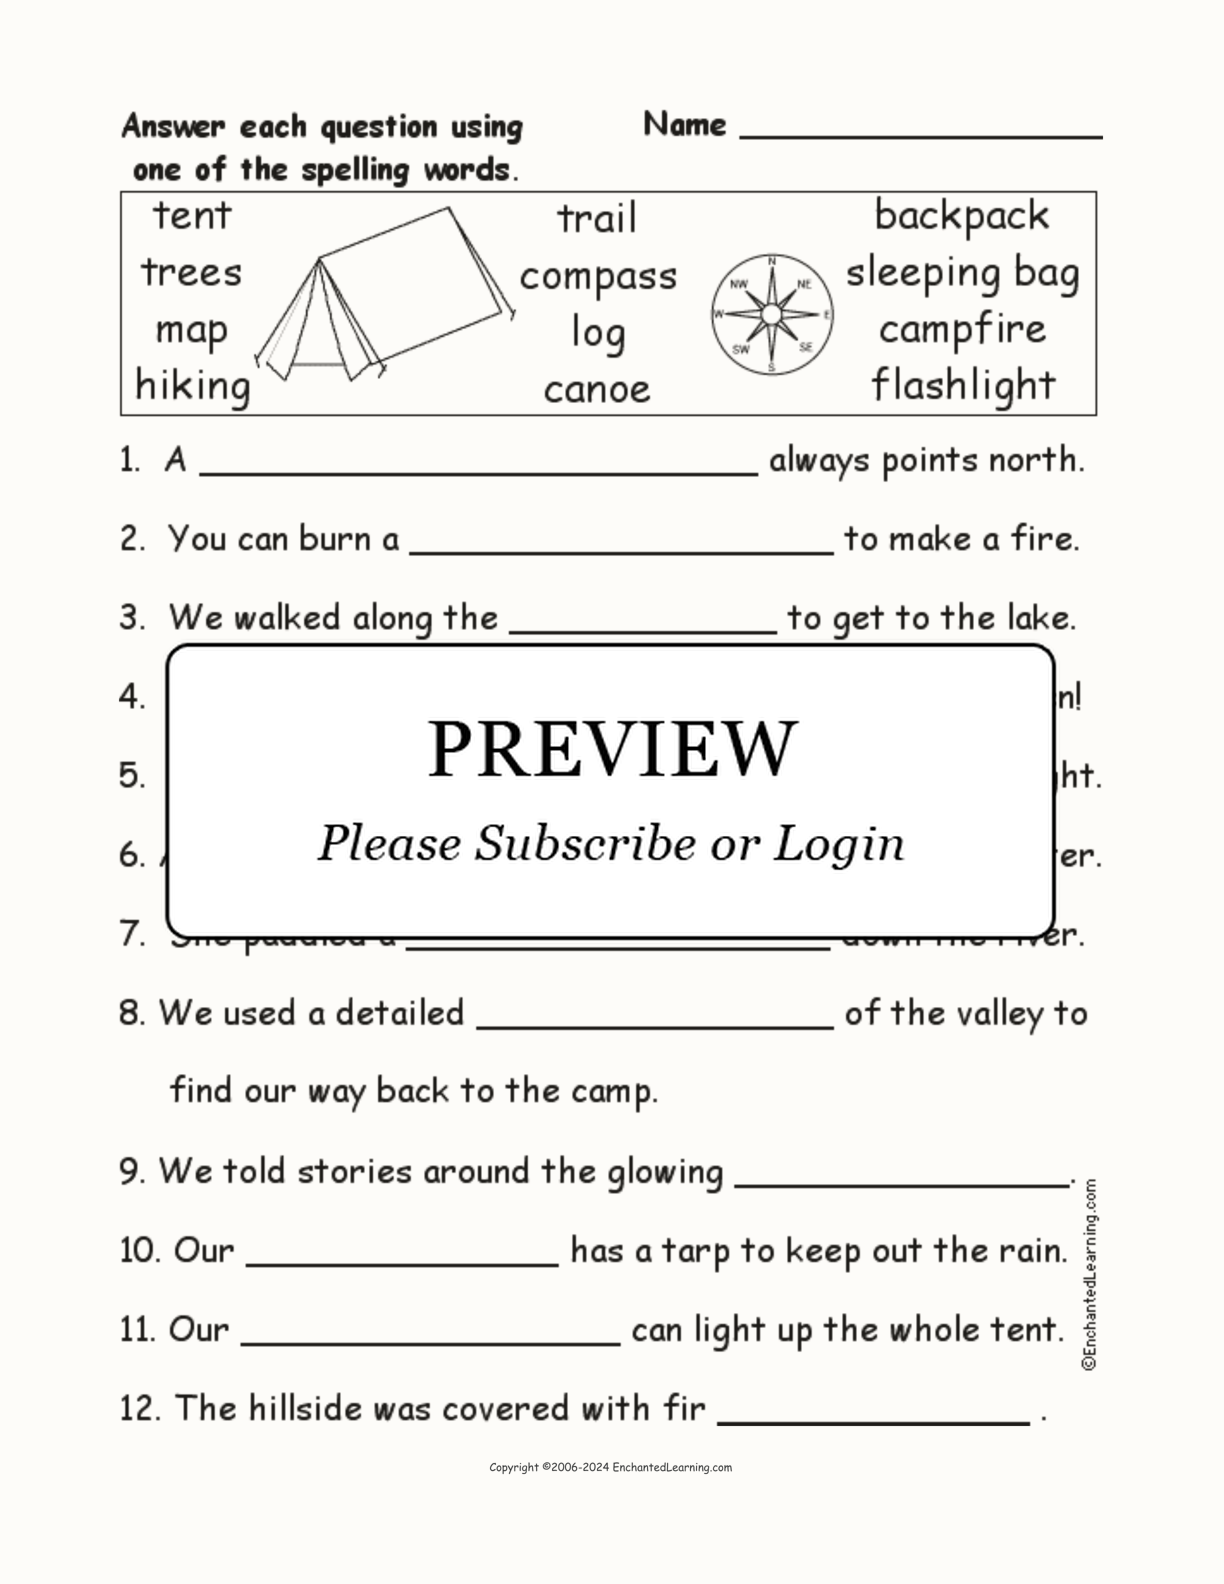 Camping Spelling Word Questions interactive worksheet page 1